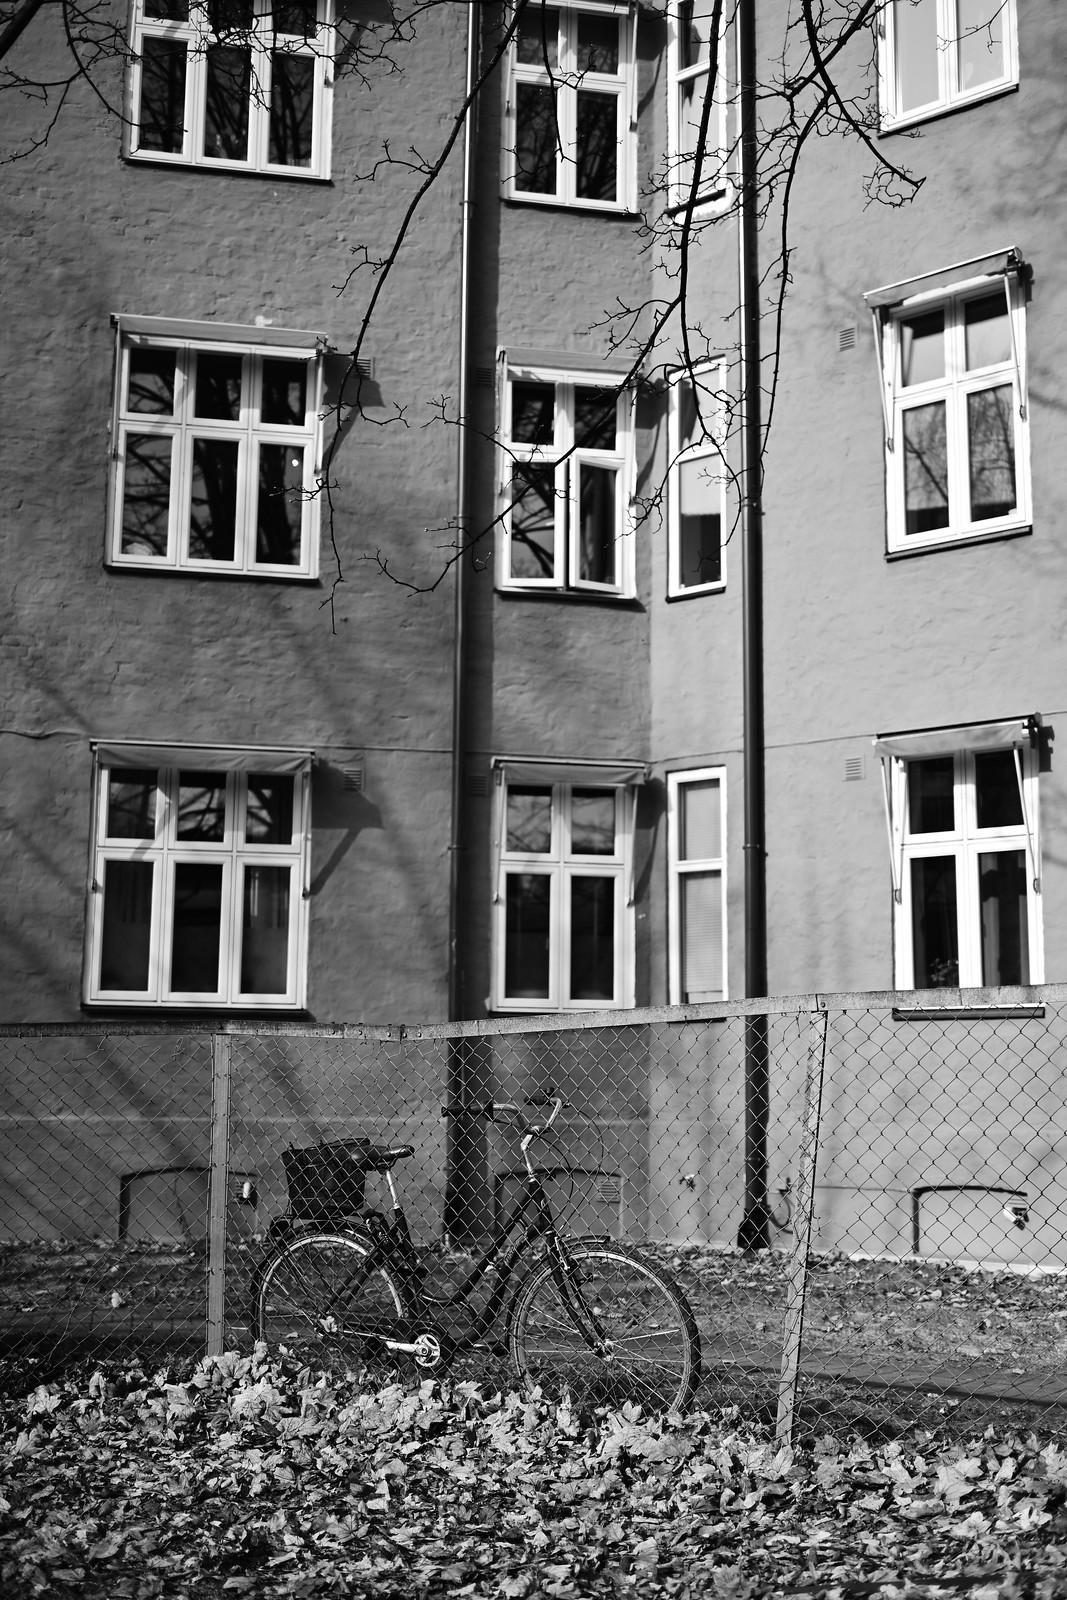 Bicycle by the fence